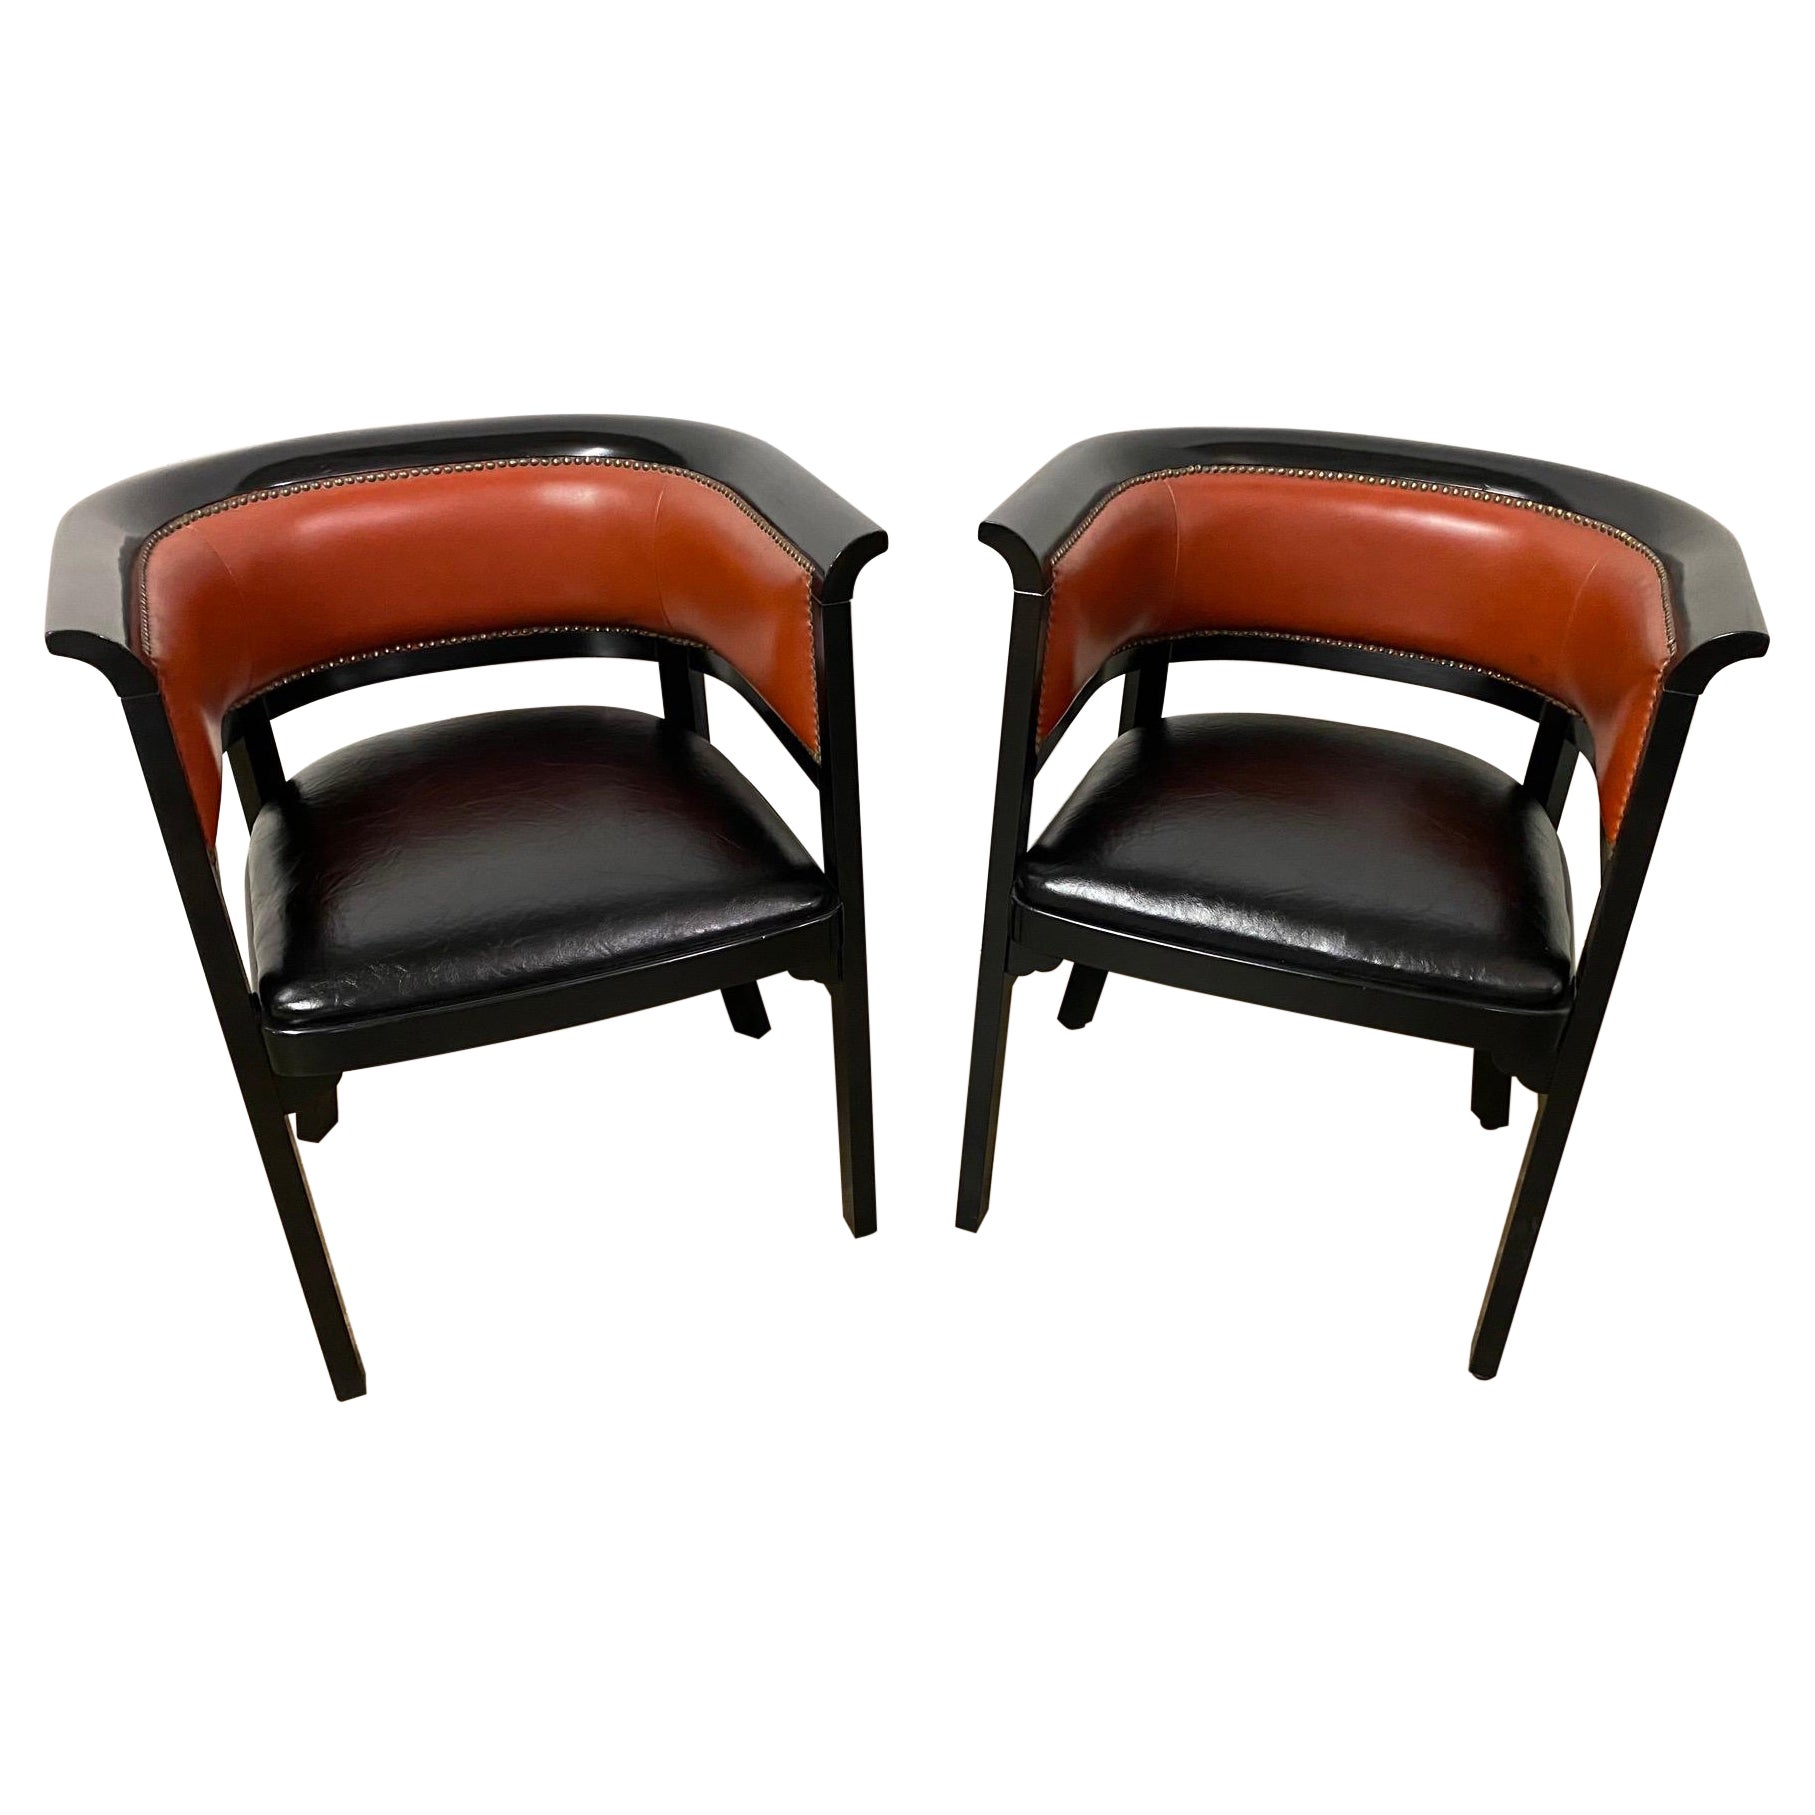 Pair of Mid-Century Modern Ebony Black Lacquered Arm Chairs For Sale